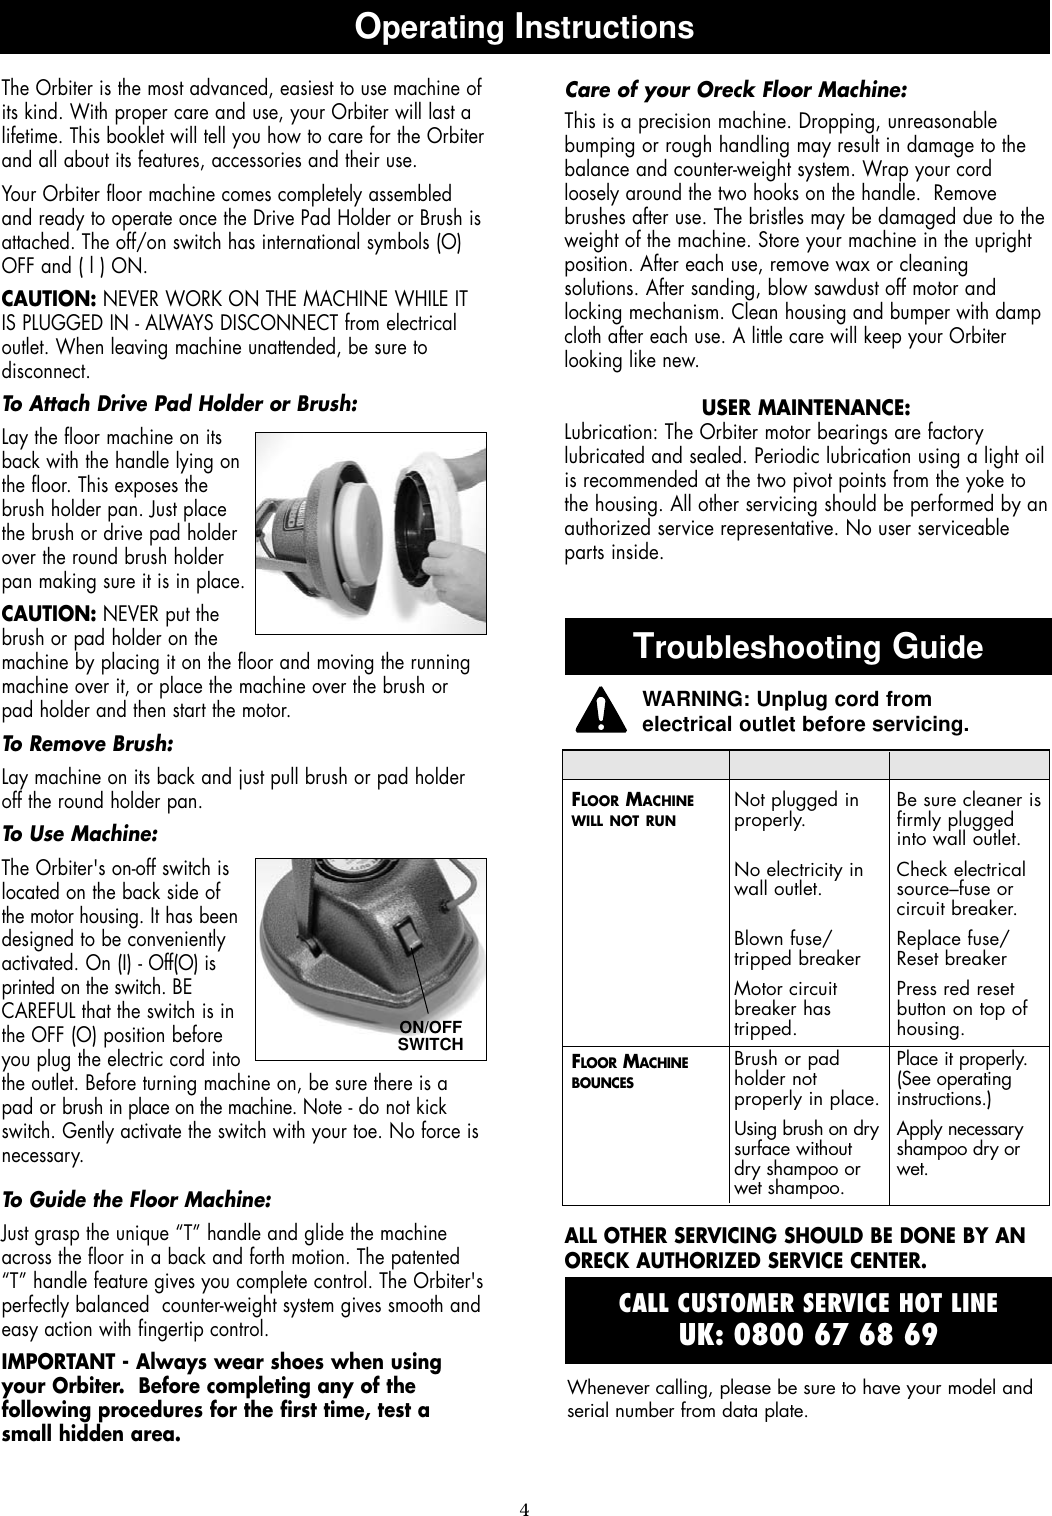 Page 4 of 8 - Oreck Oreck-Orbiter-Orb480-Users-Manual- 53303-01 Orbitor  Oreck-orbiter-orb480-users-manual